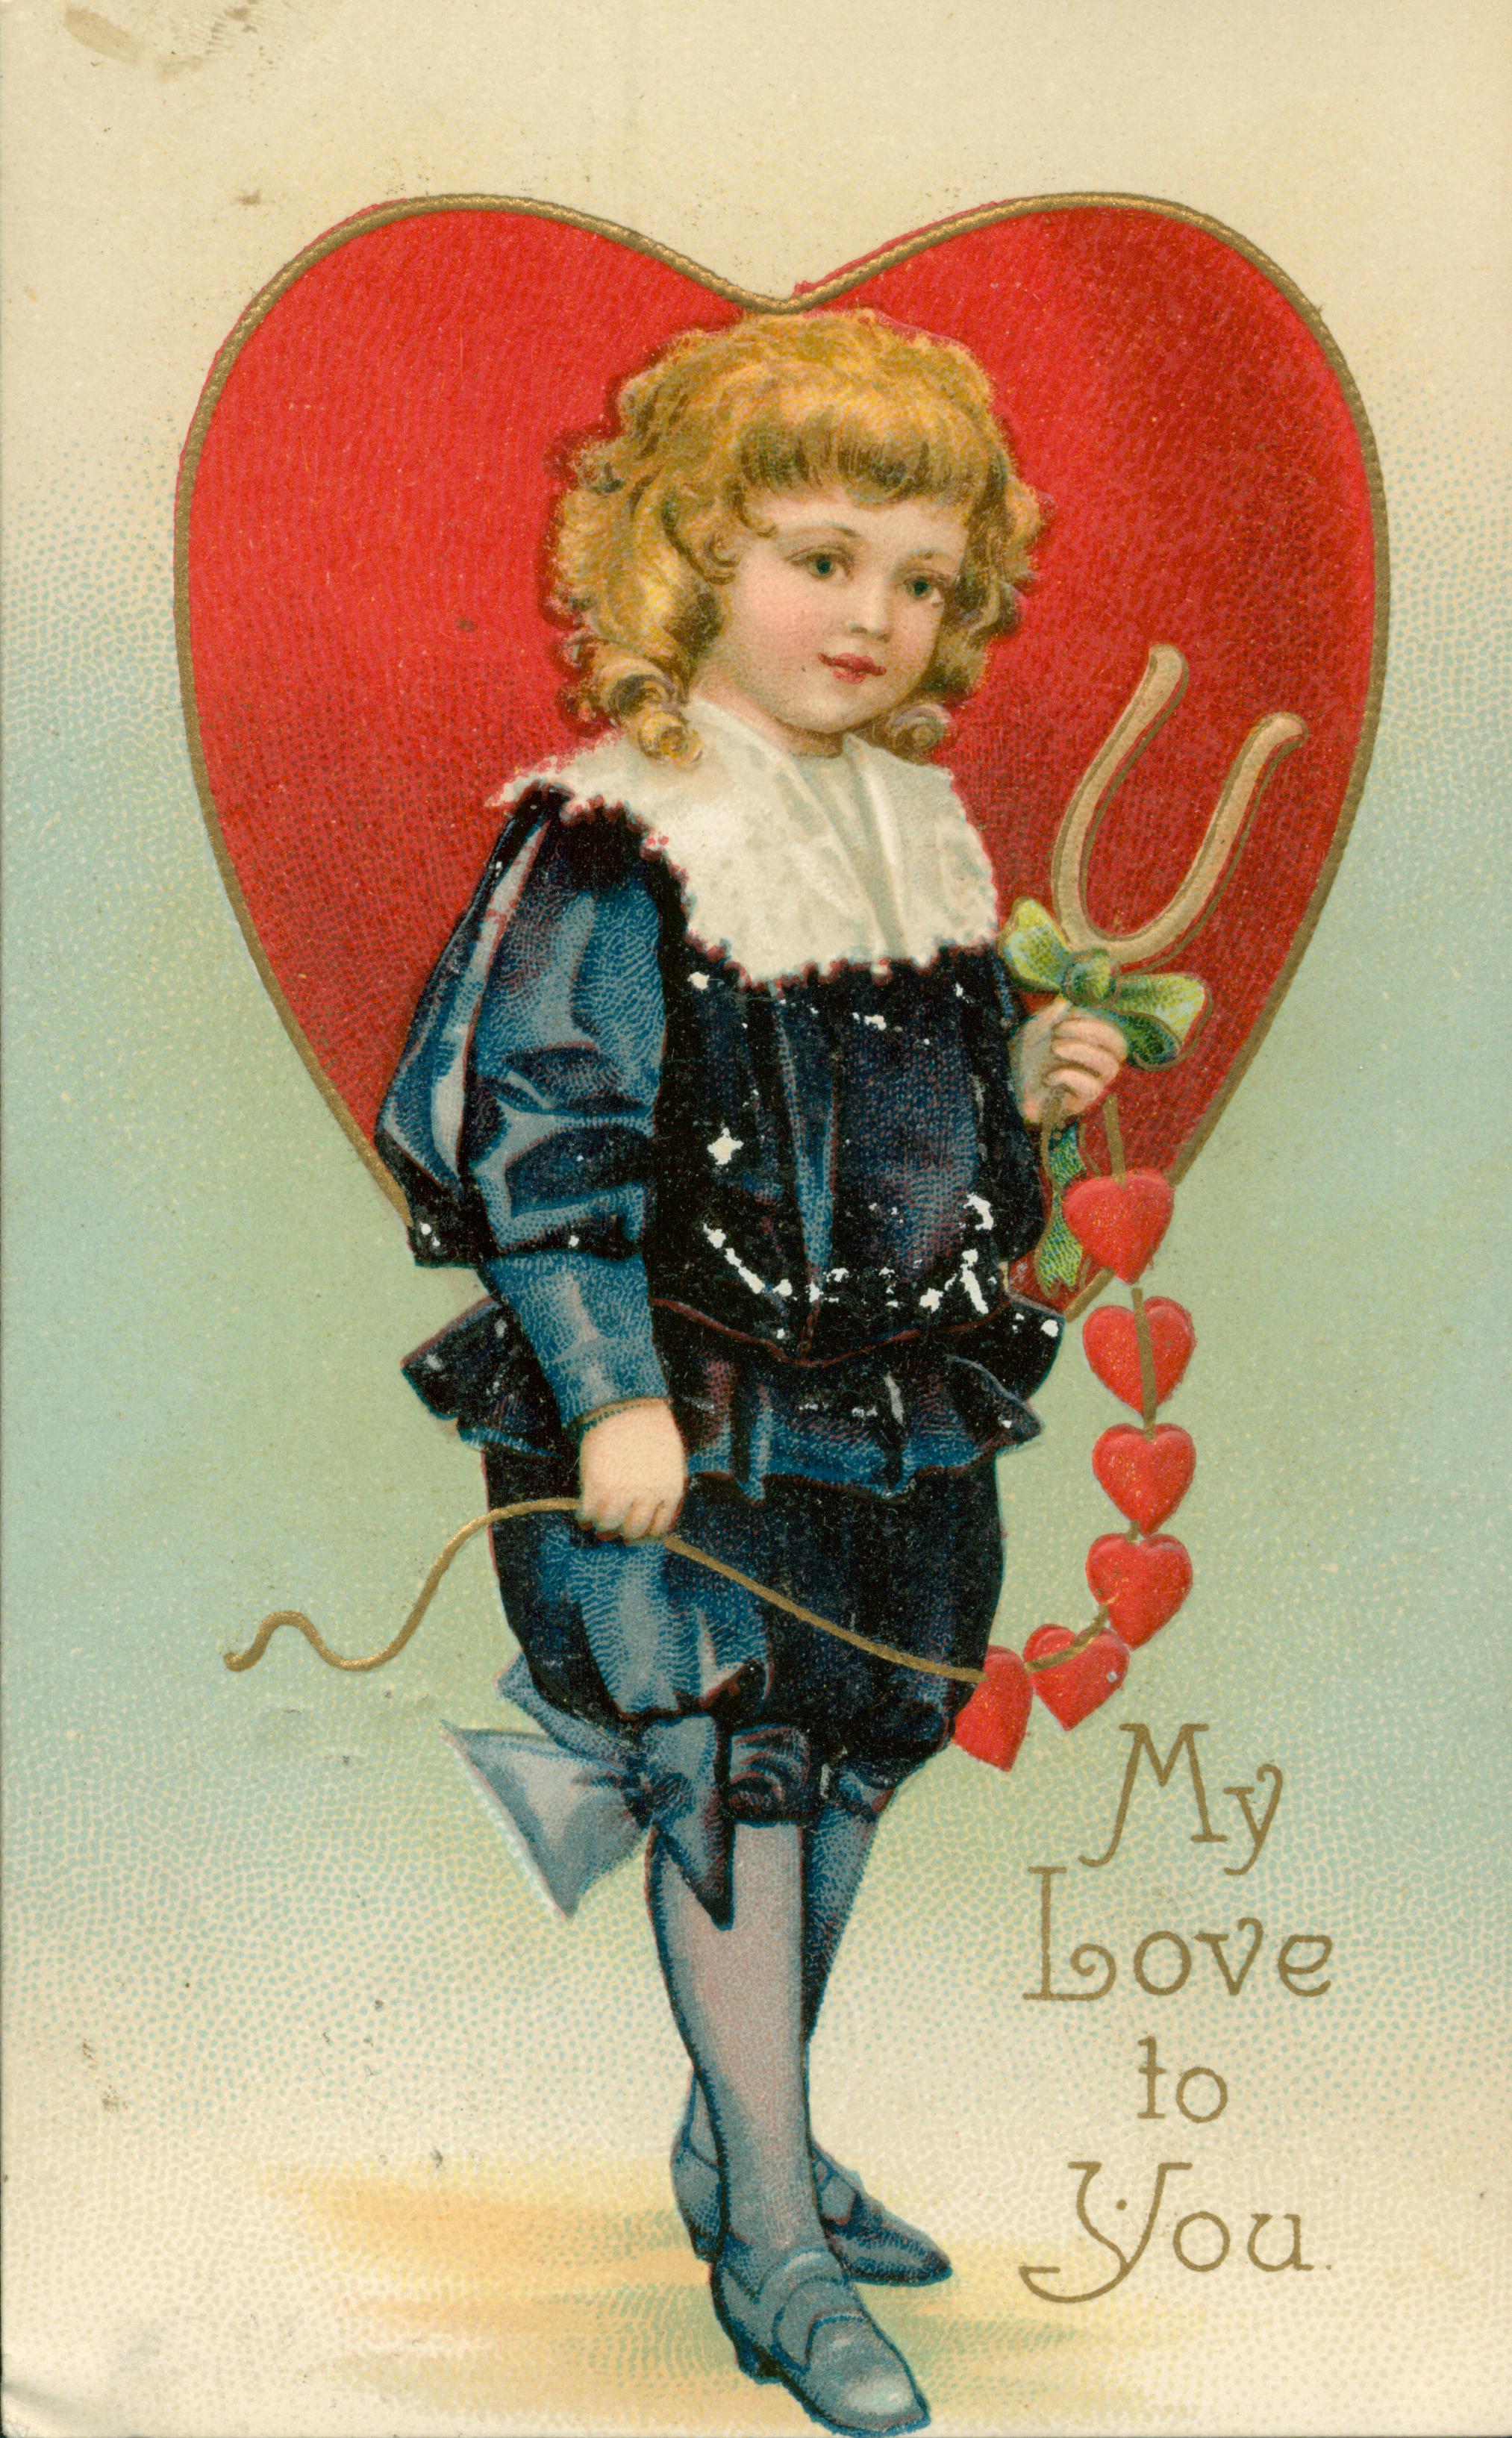 Shows a child in front of a heart holding a garland of hearts